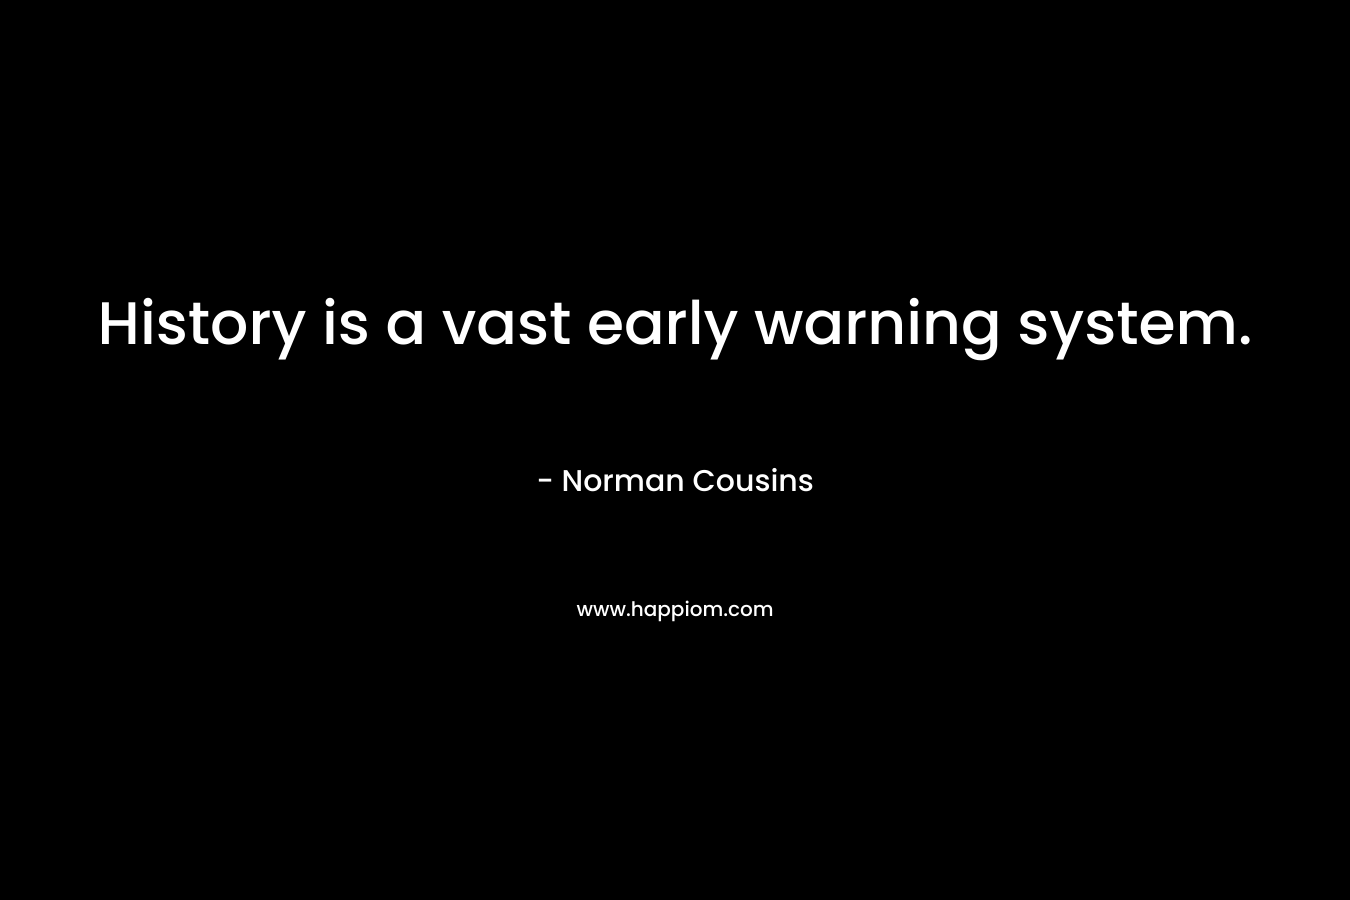 History is a vast early warning system.